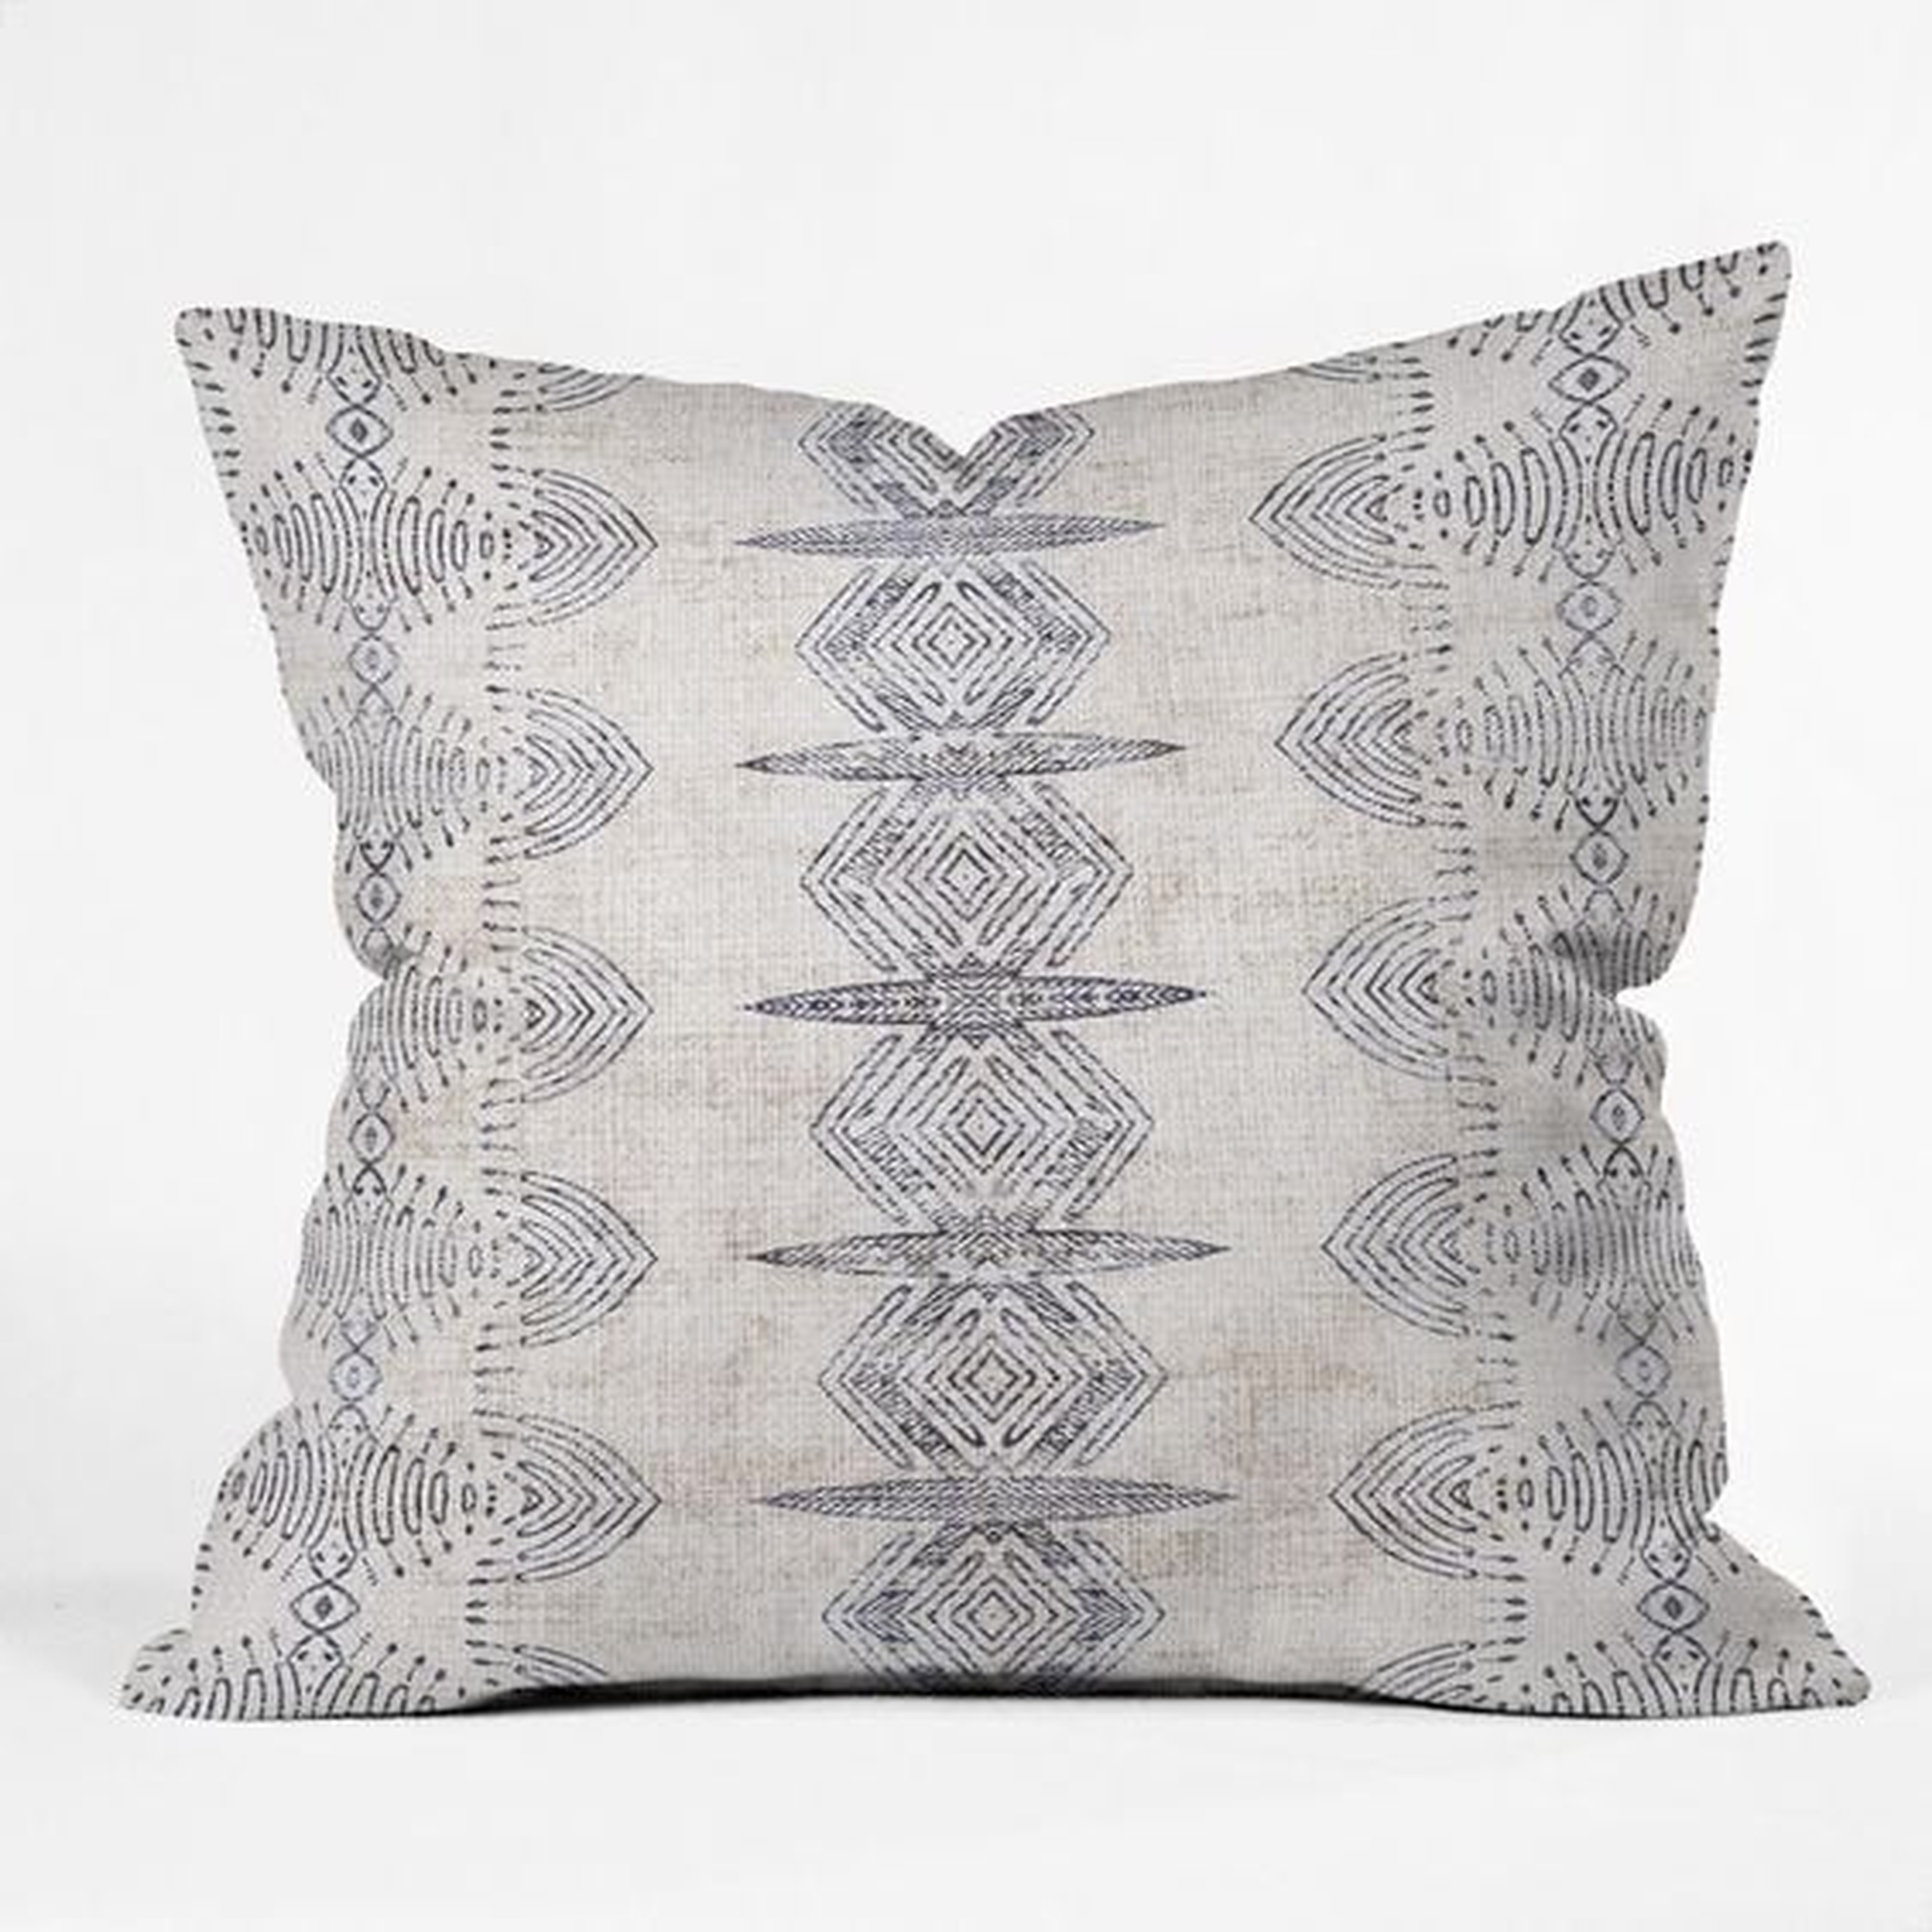 French Linen Eris Throw Pillow - 16"x16" - Pillow Cover with Insert - Wander Print Co.